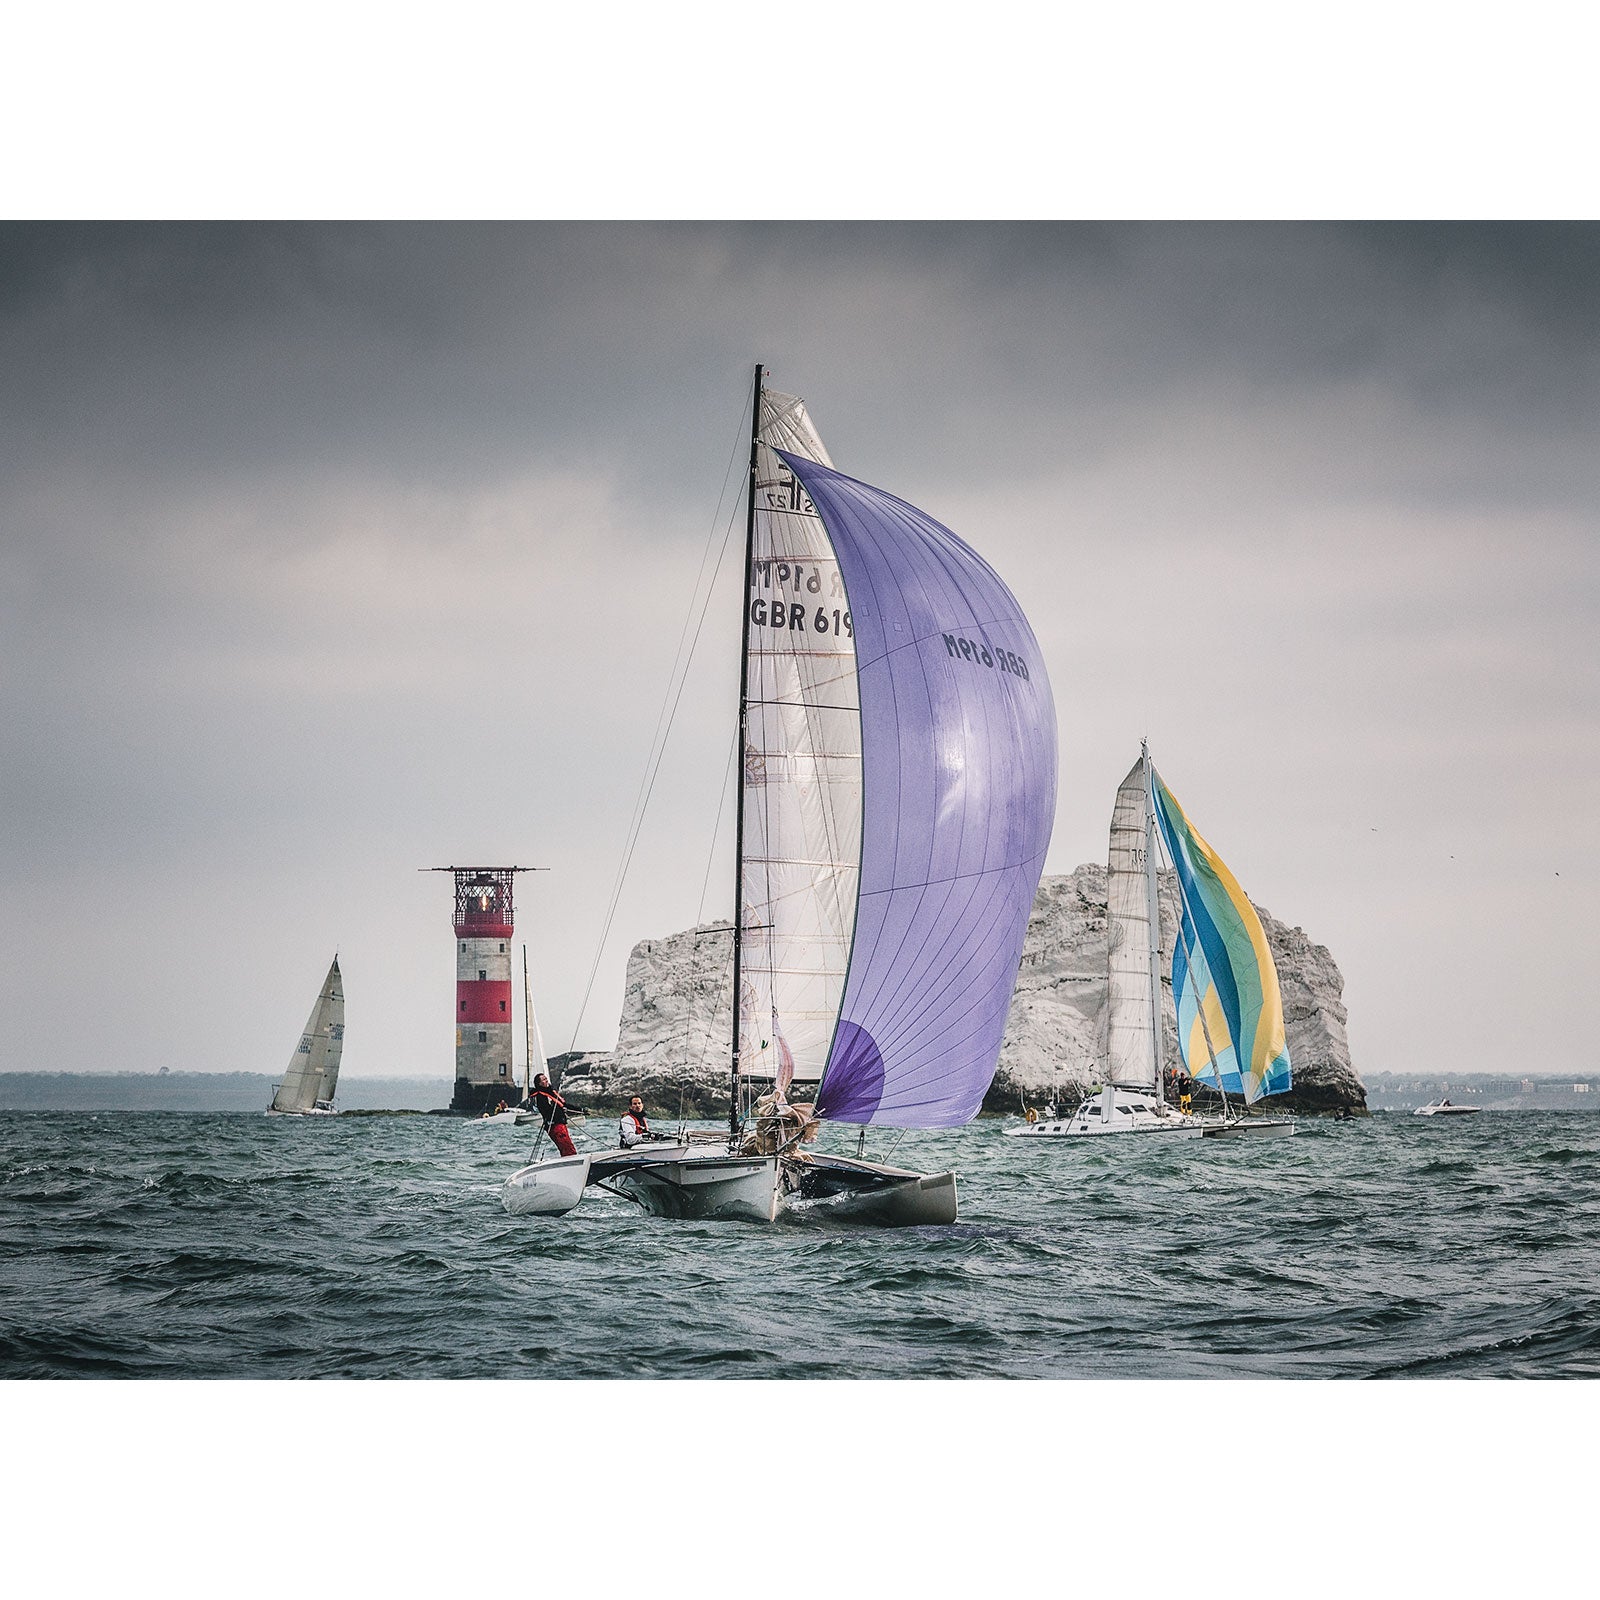 Sailboats racing near the Isle of Wight coastline with a lighthouse and rock formation in the background captured by Available Light Photography's Round the Island Race.